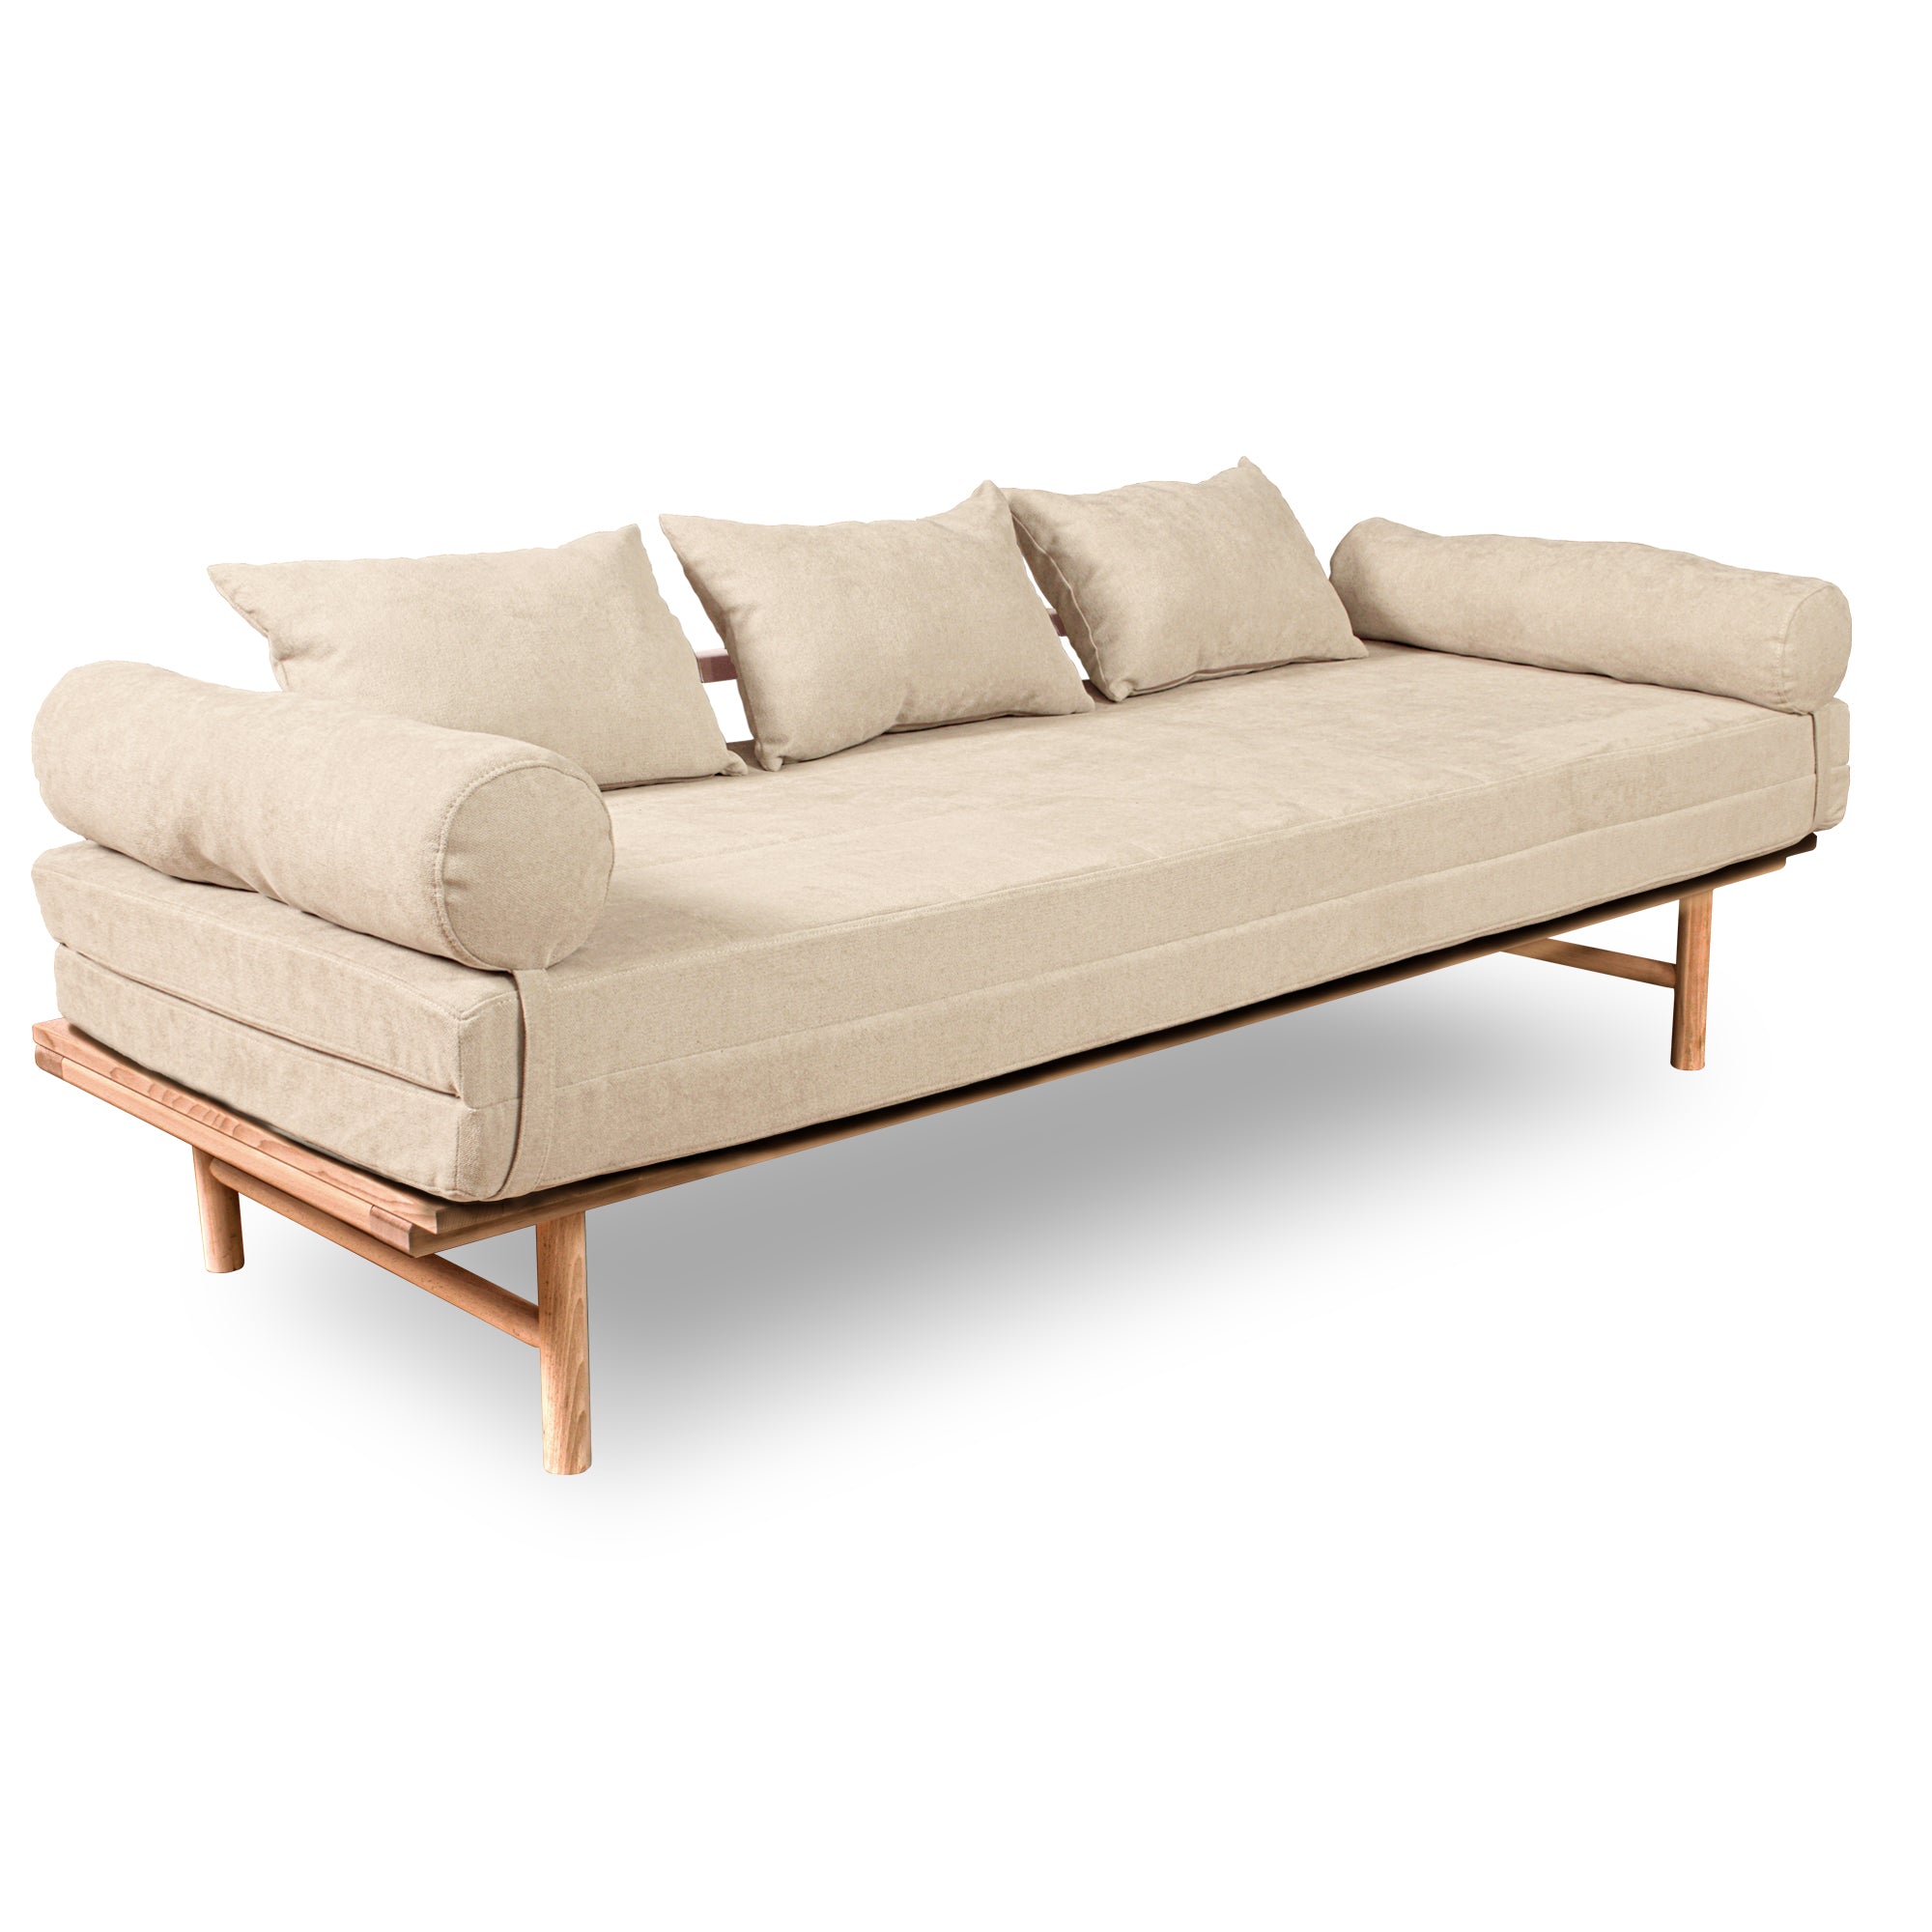 Le MAR Folding Daybed, Beech Wood Frame, Natural Colour-upholstery creamy